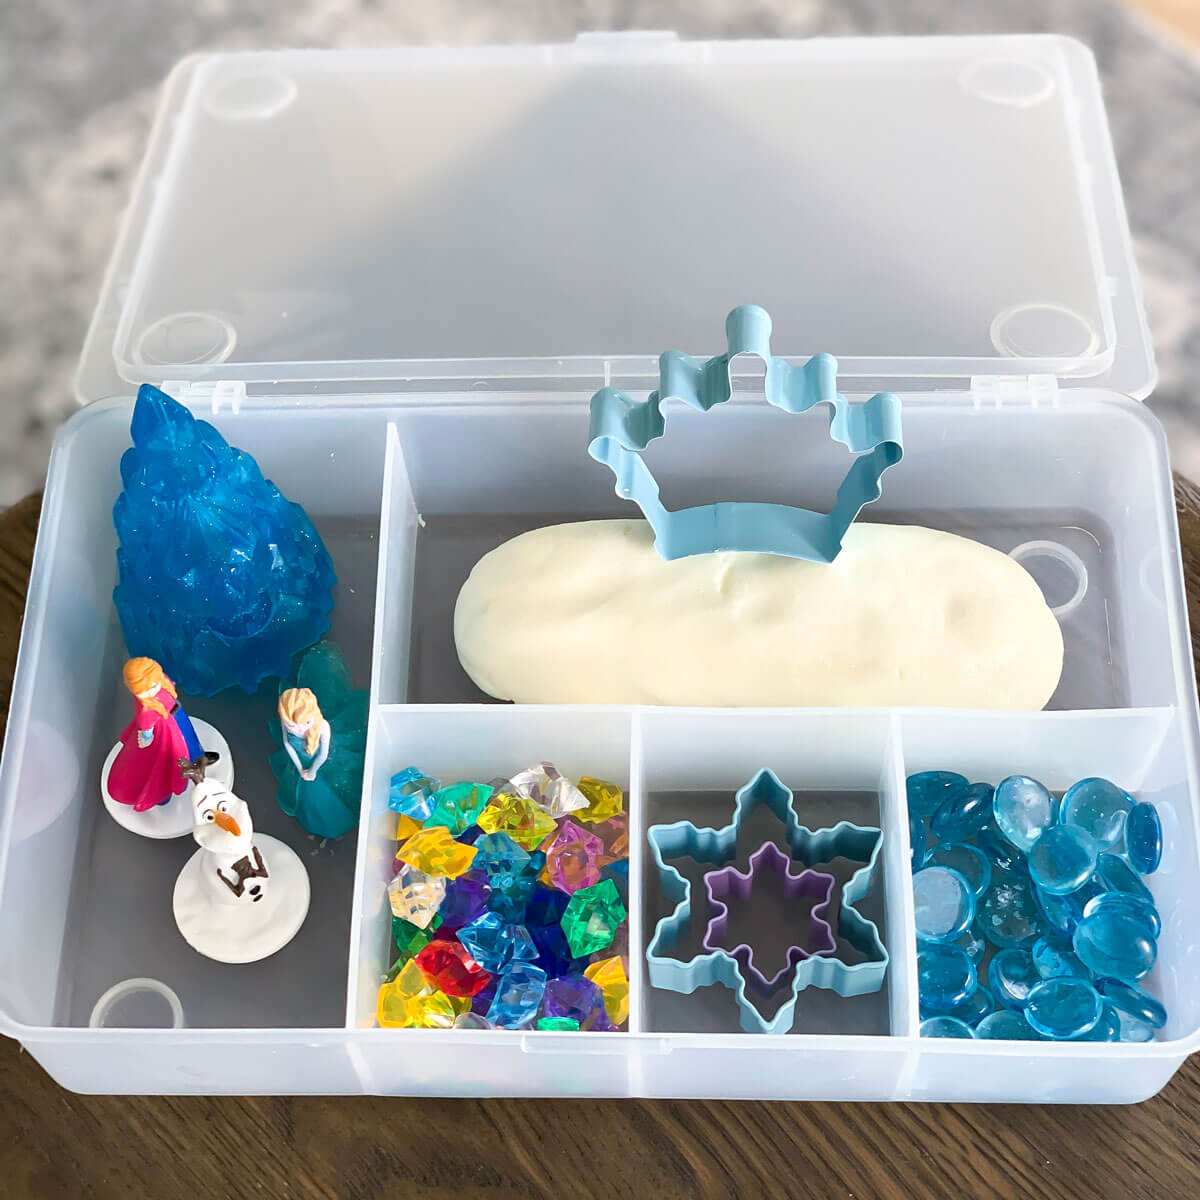 Frozen Play Doh – Make Your Own Kit